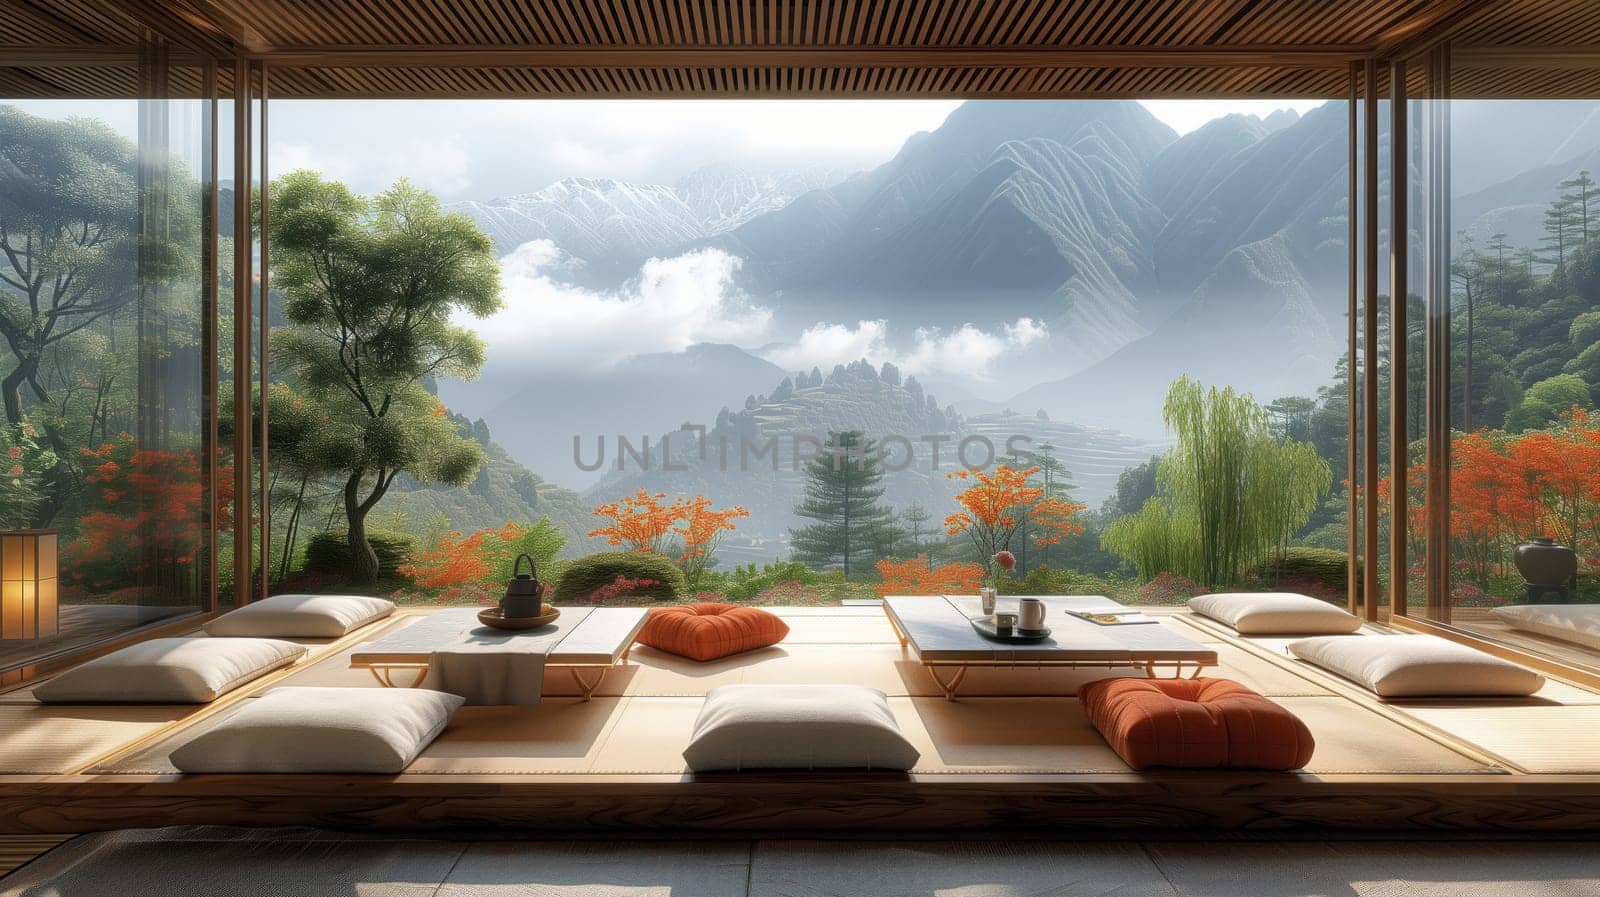 A cozy room filled with numerous pillows and wooden tables, offering a stunning view of the mountain landscape through the window